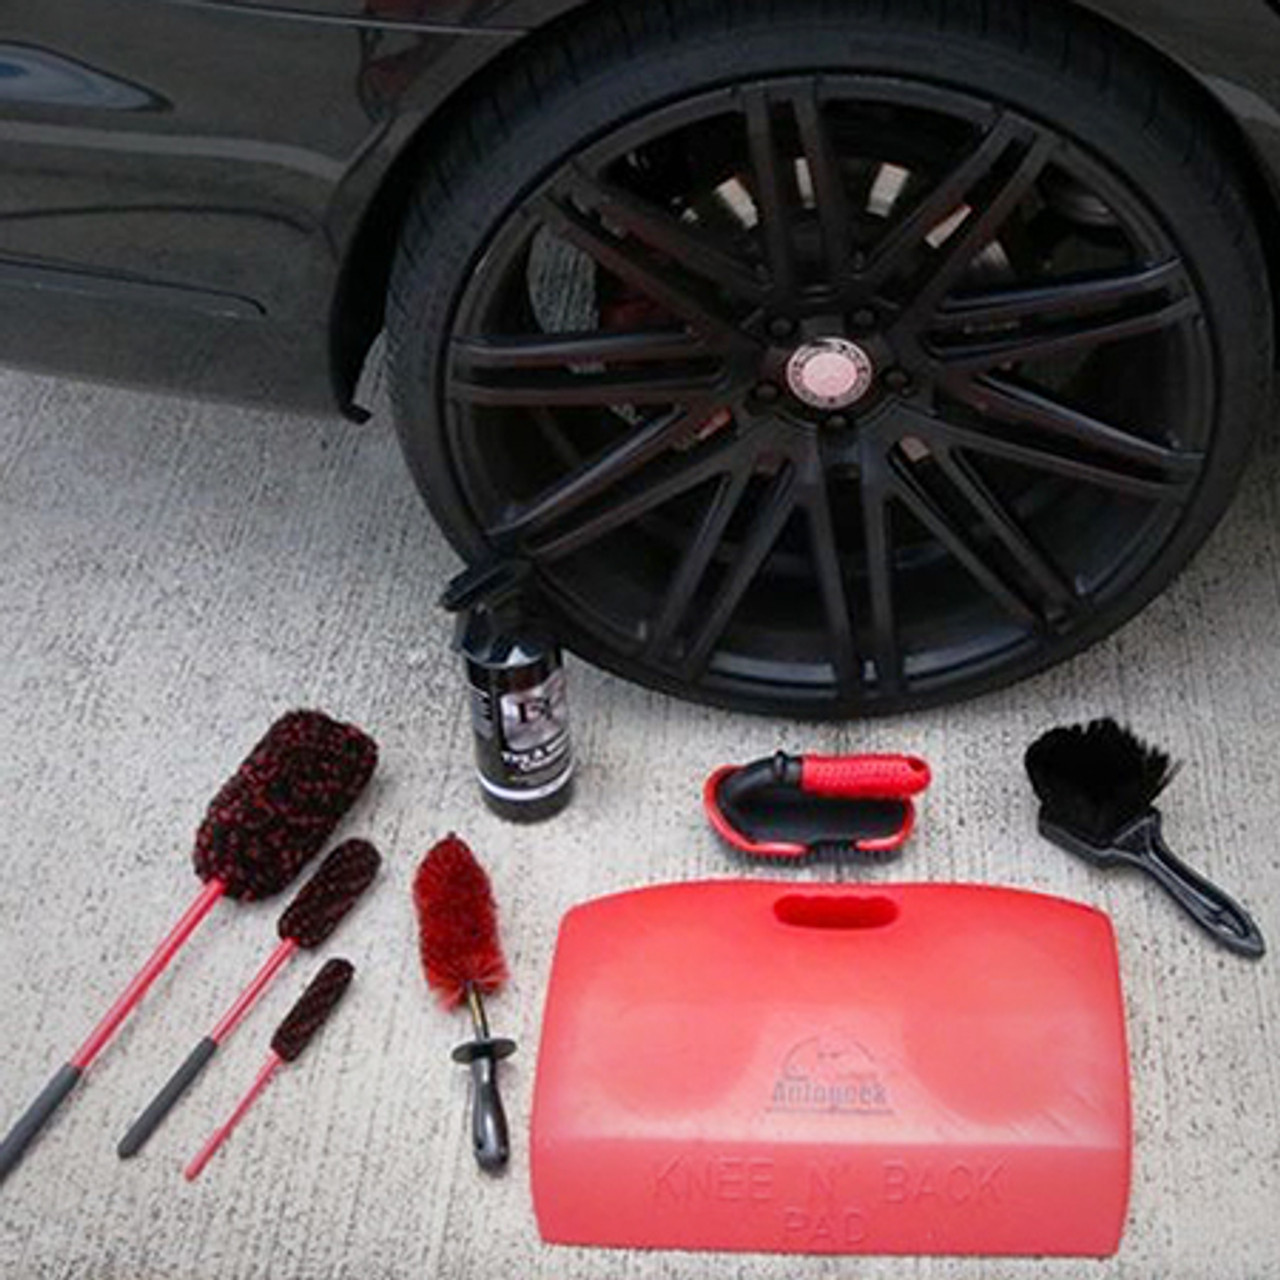 https://cdn11.bigcommerce.com/s-ndtdat03b2/images/stencil/1280x1280/x/speed%20master%20wheel%20cleaning%20brushes%20review__22337.original.jpg